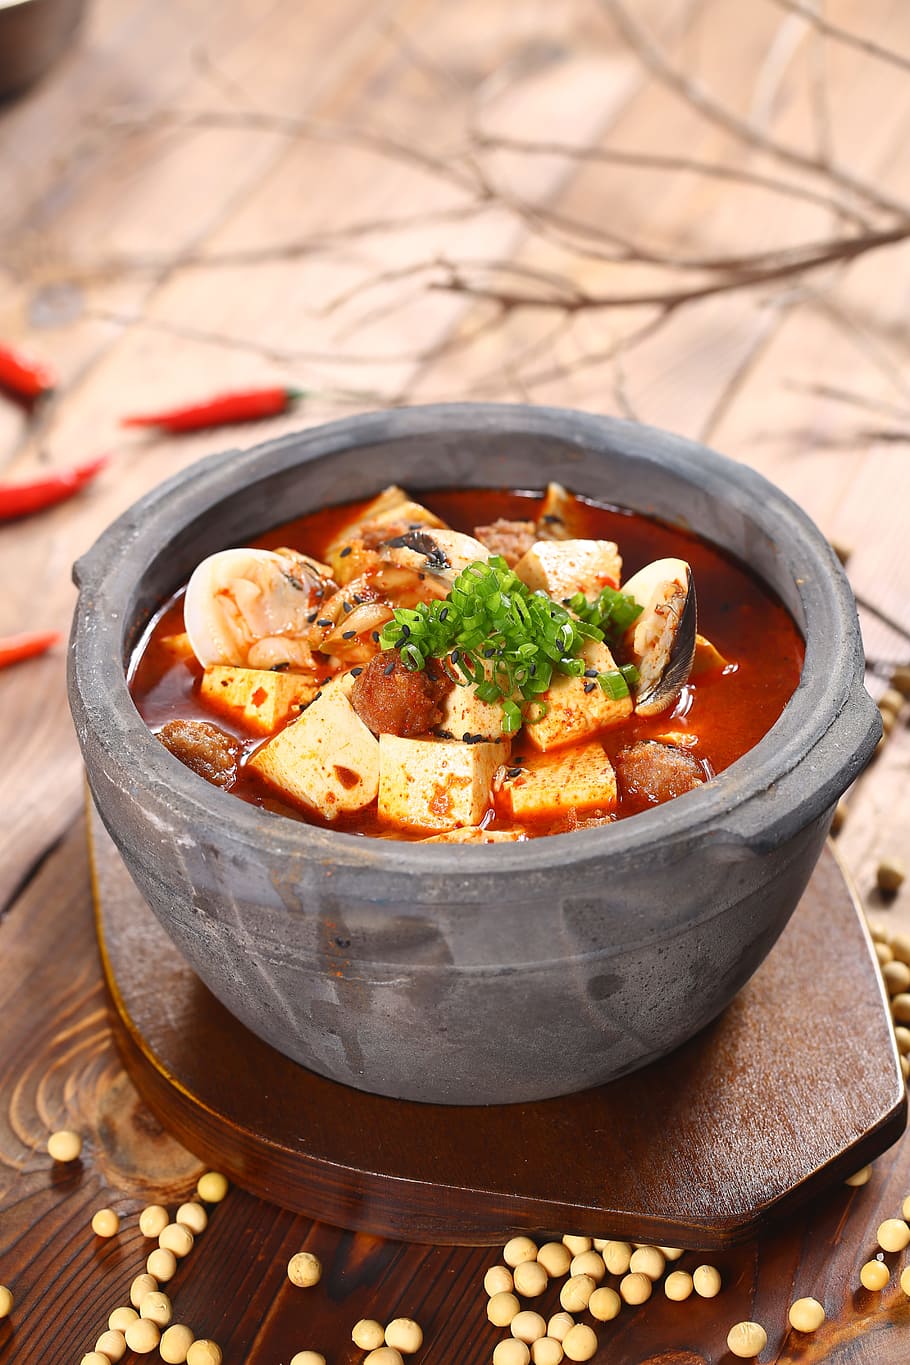 tofu, hot, casserole, food and drink, food, bowl, ready-to-eat, healthy eating, vegetable, table